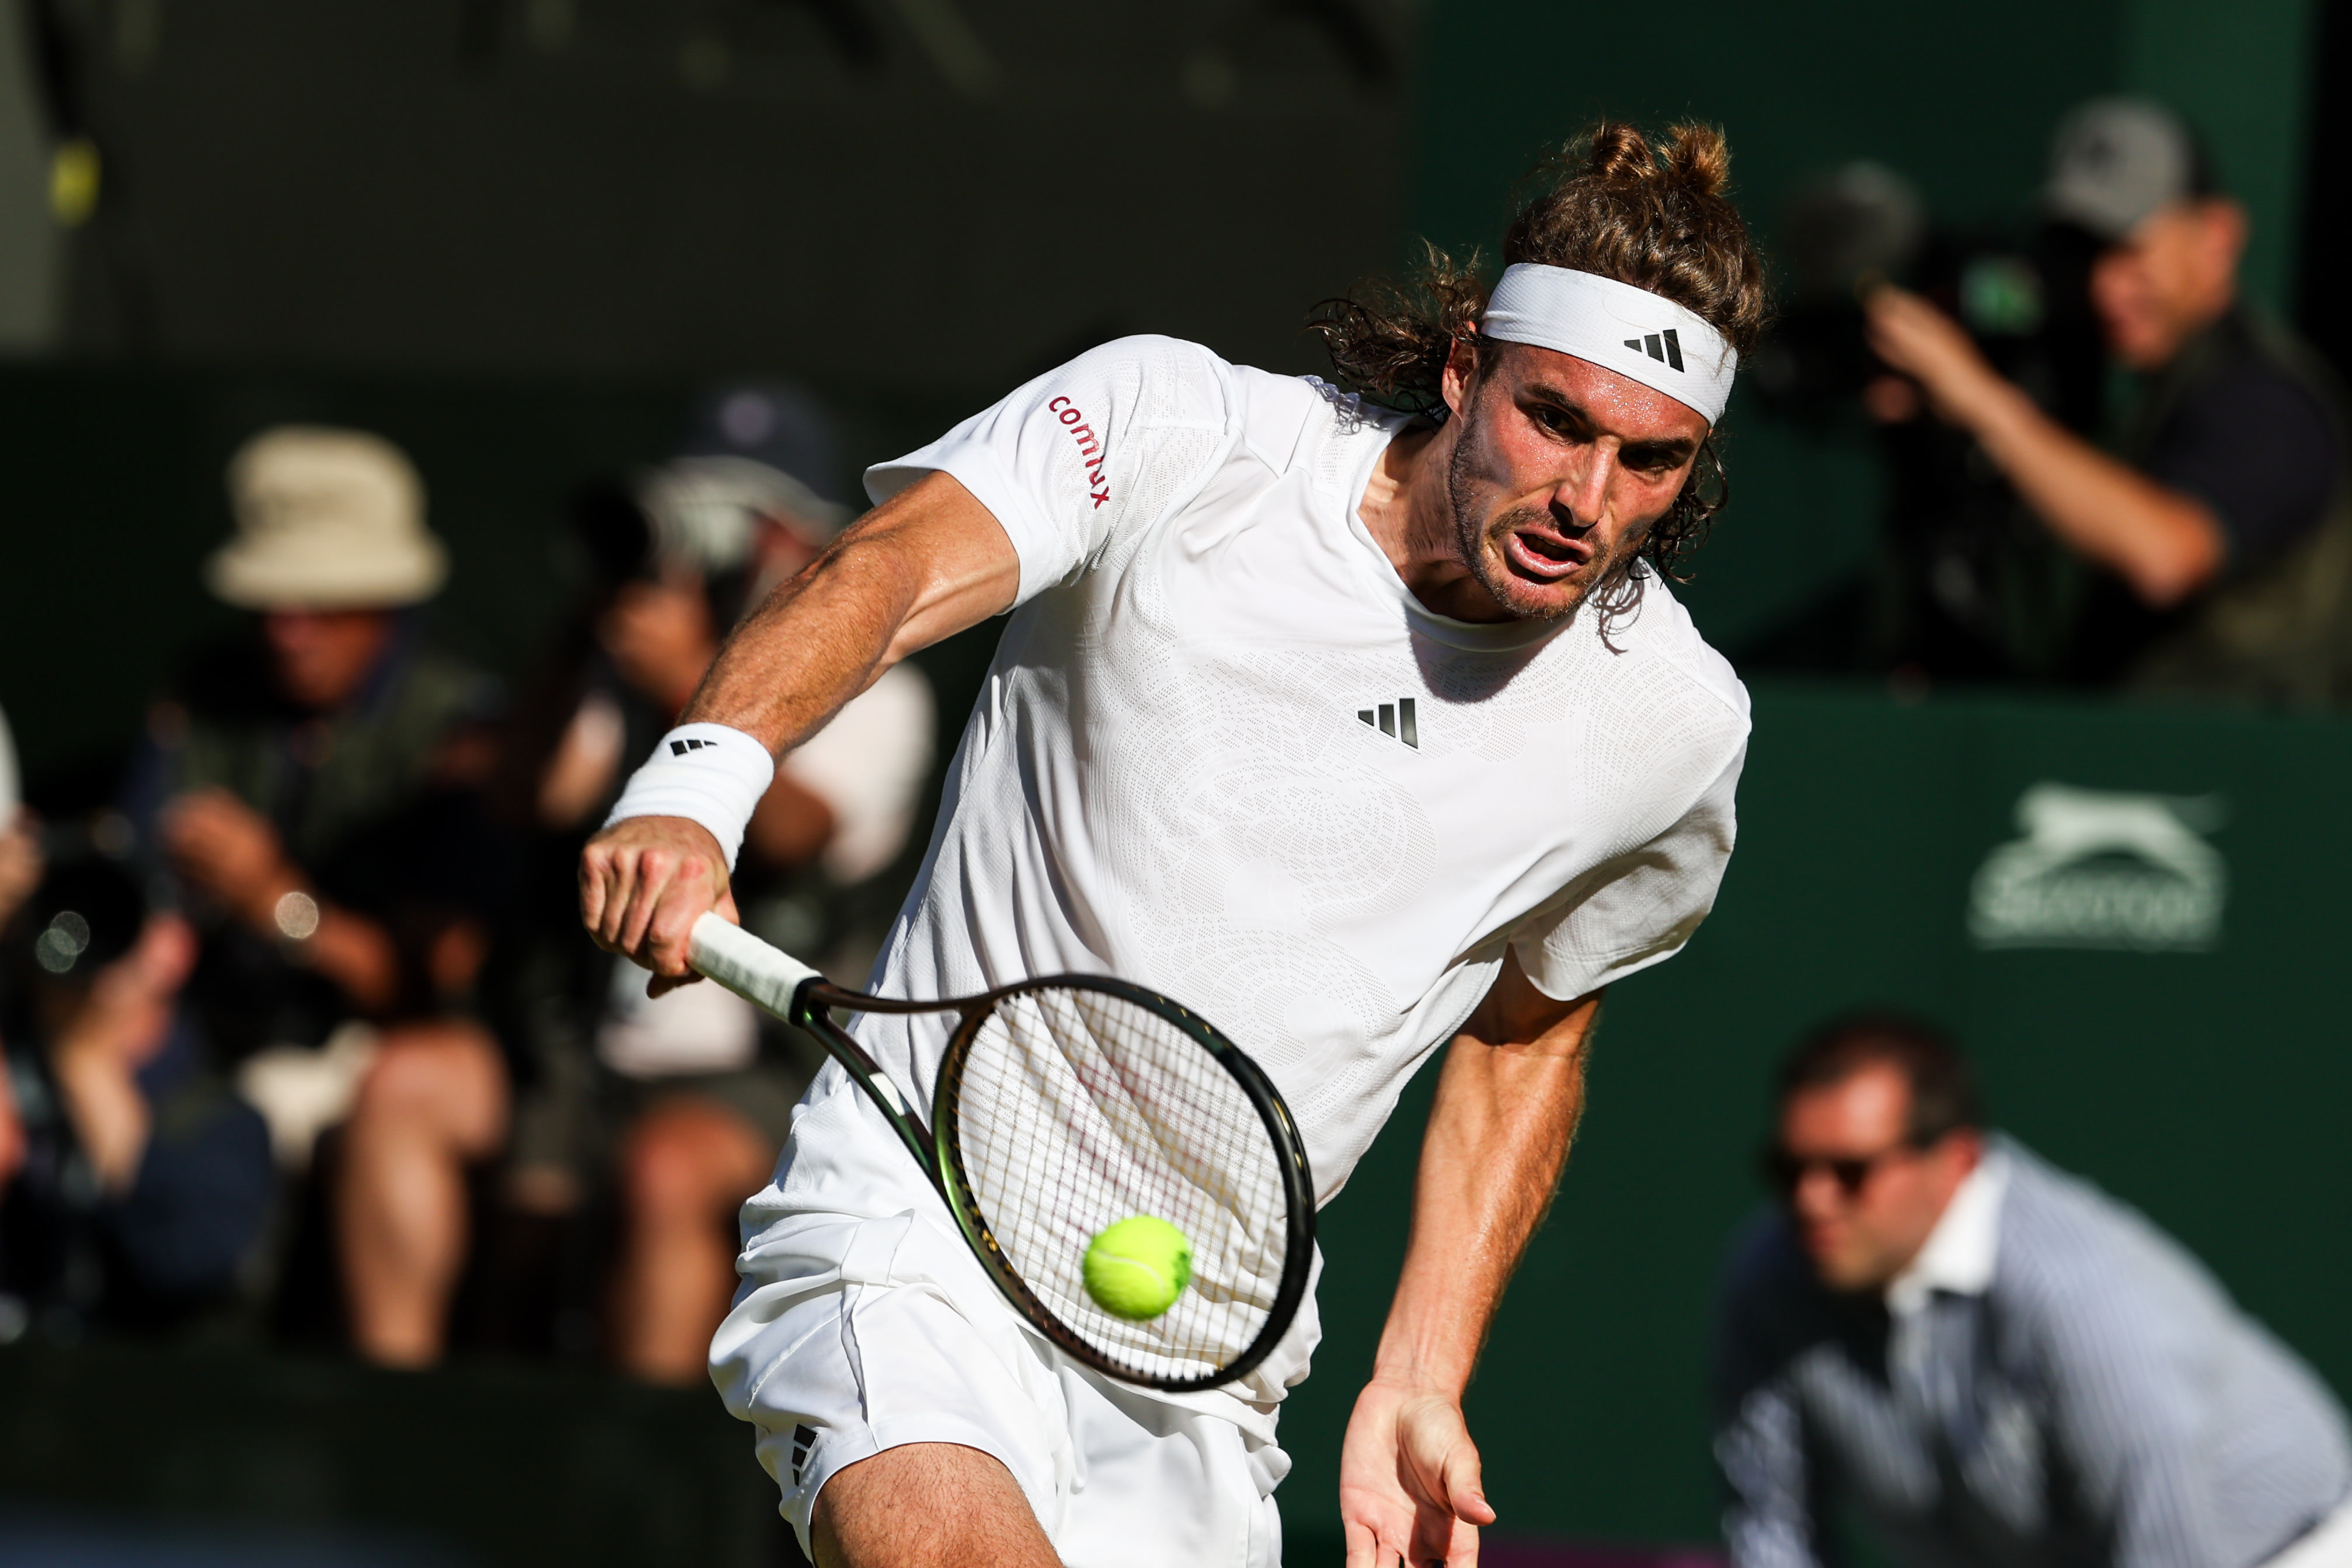 Stefanos Tsitsipas shows himself he can create new Wimbledon memories by thwarting Andy Murray